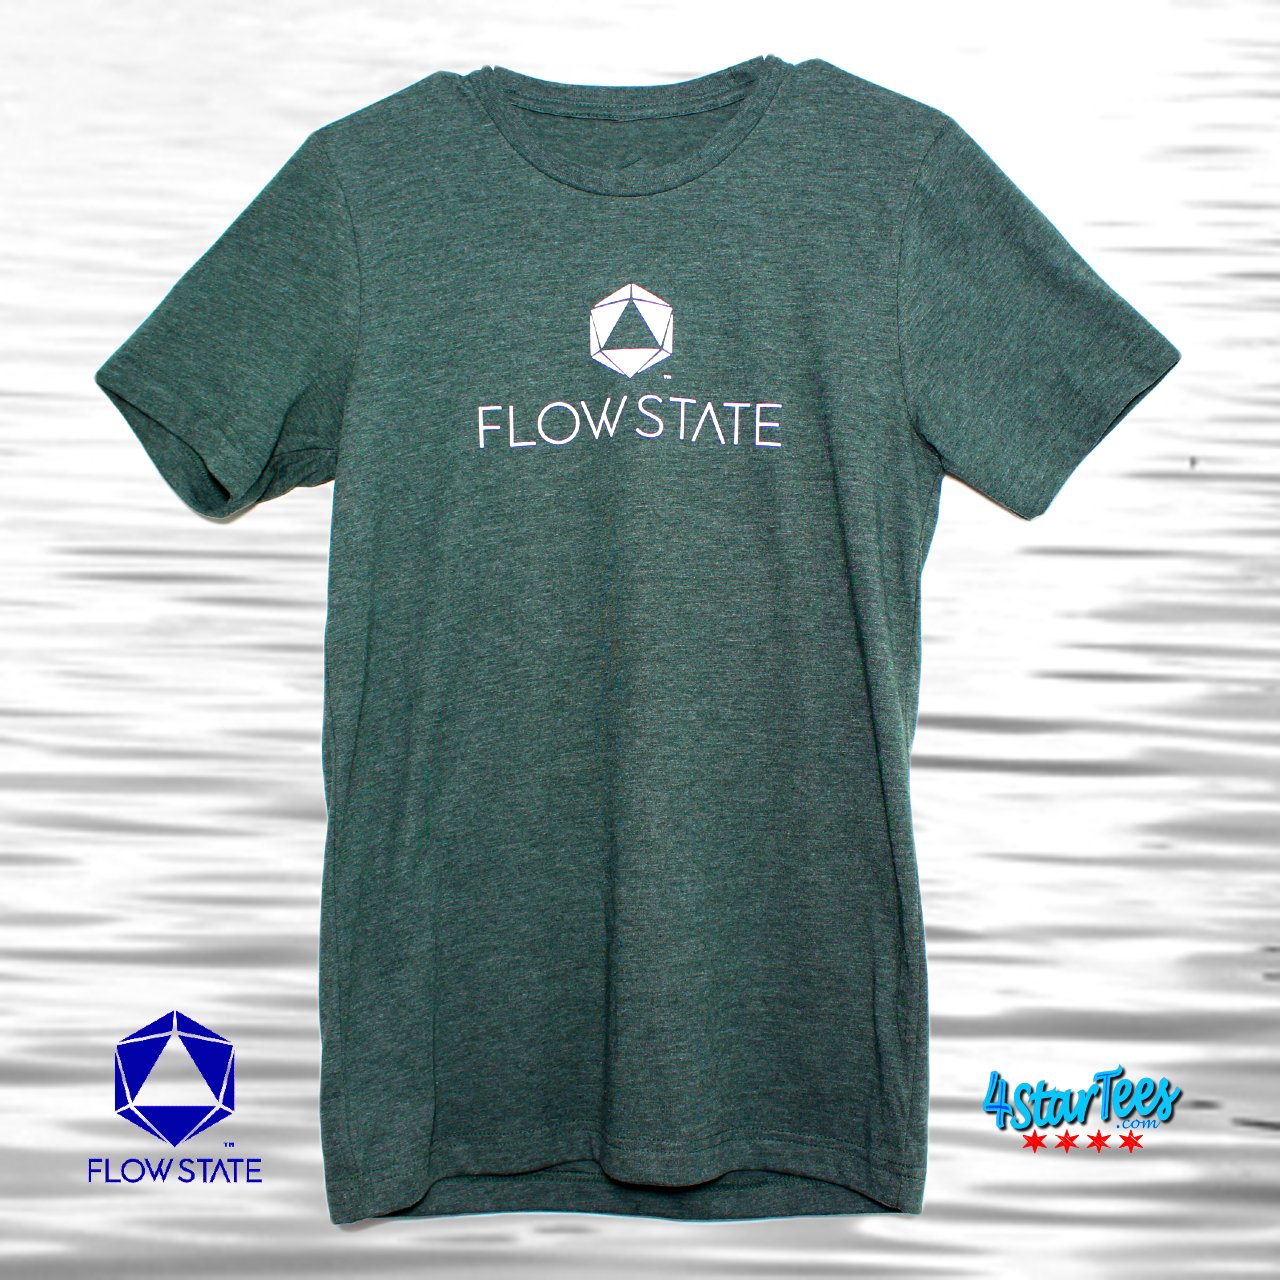 FLOW STATE Reflective Athleisure Tee - Heather Forest Green